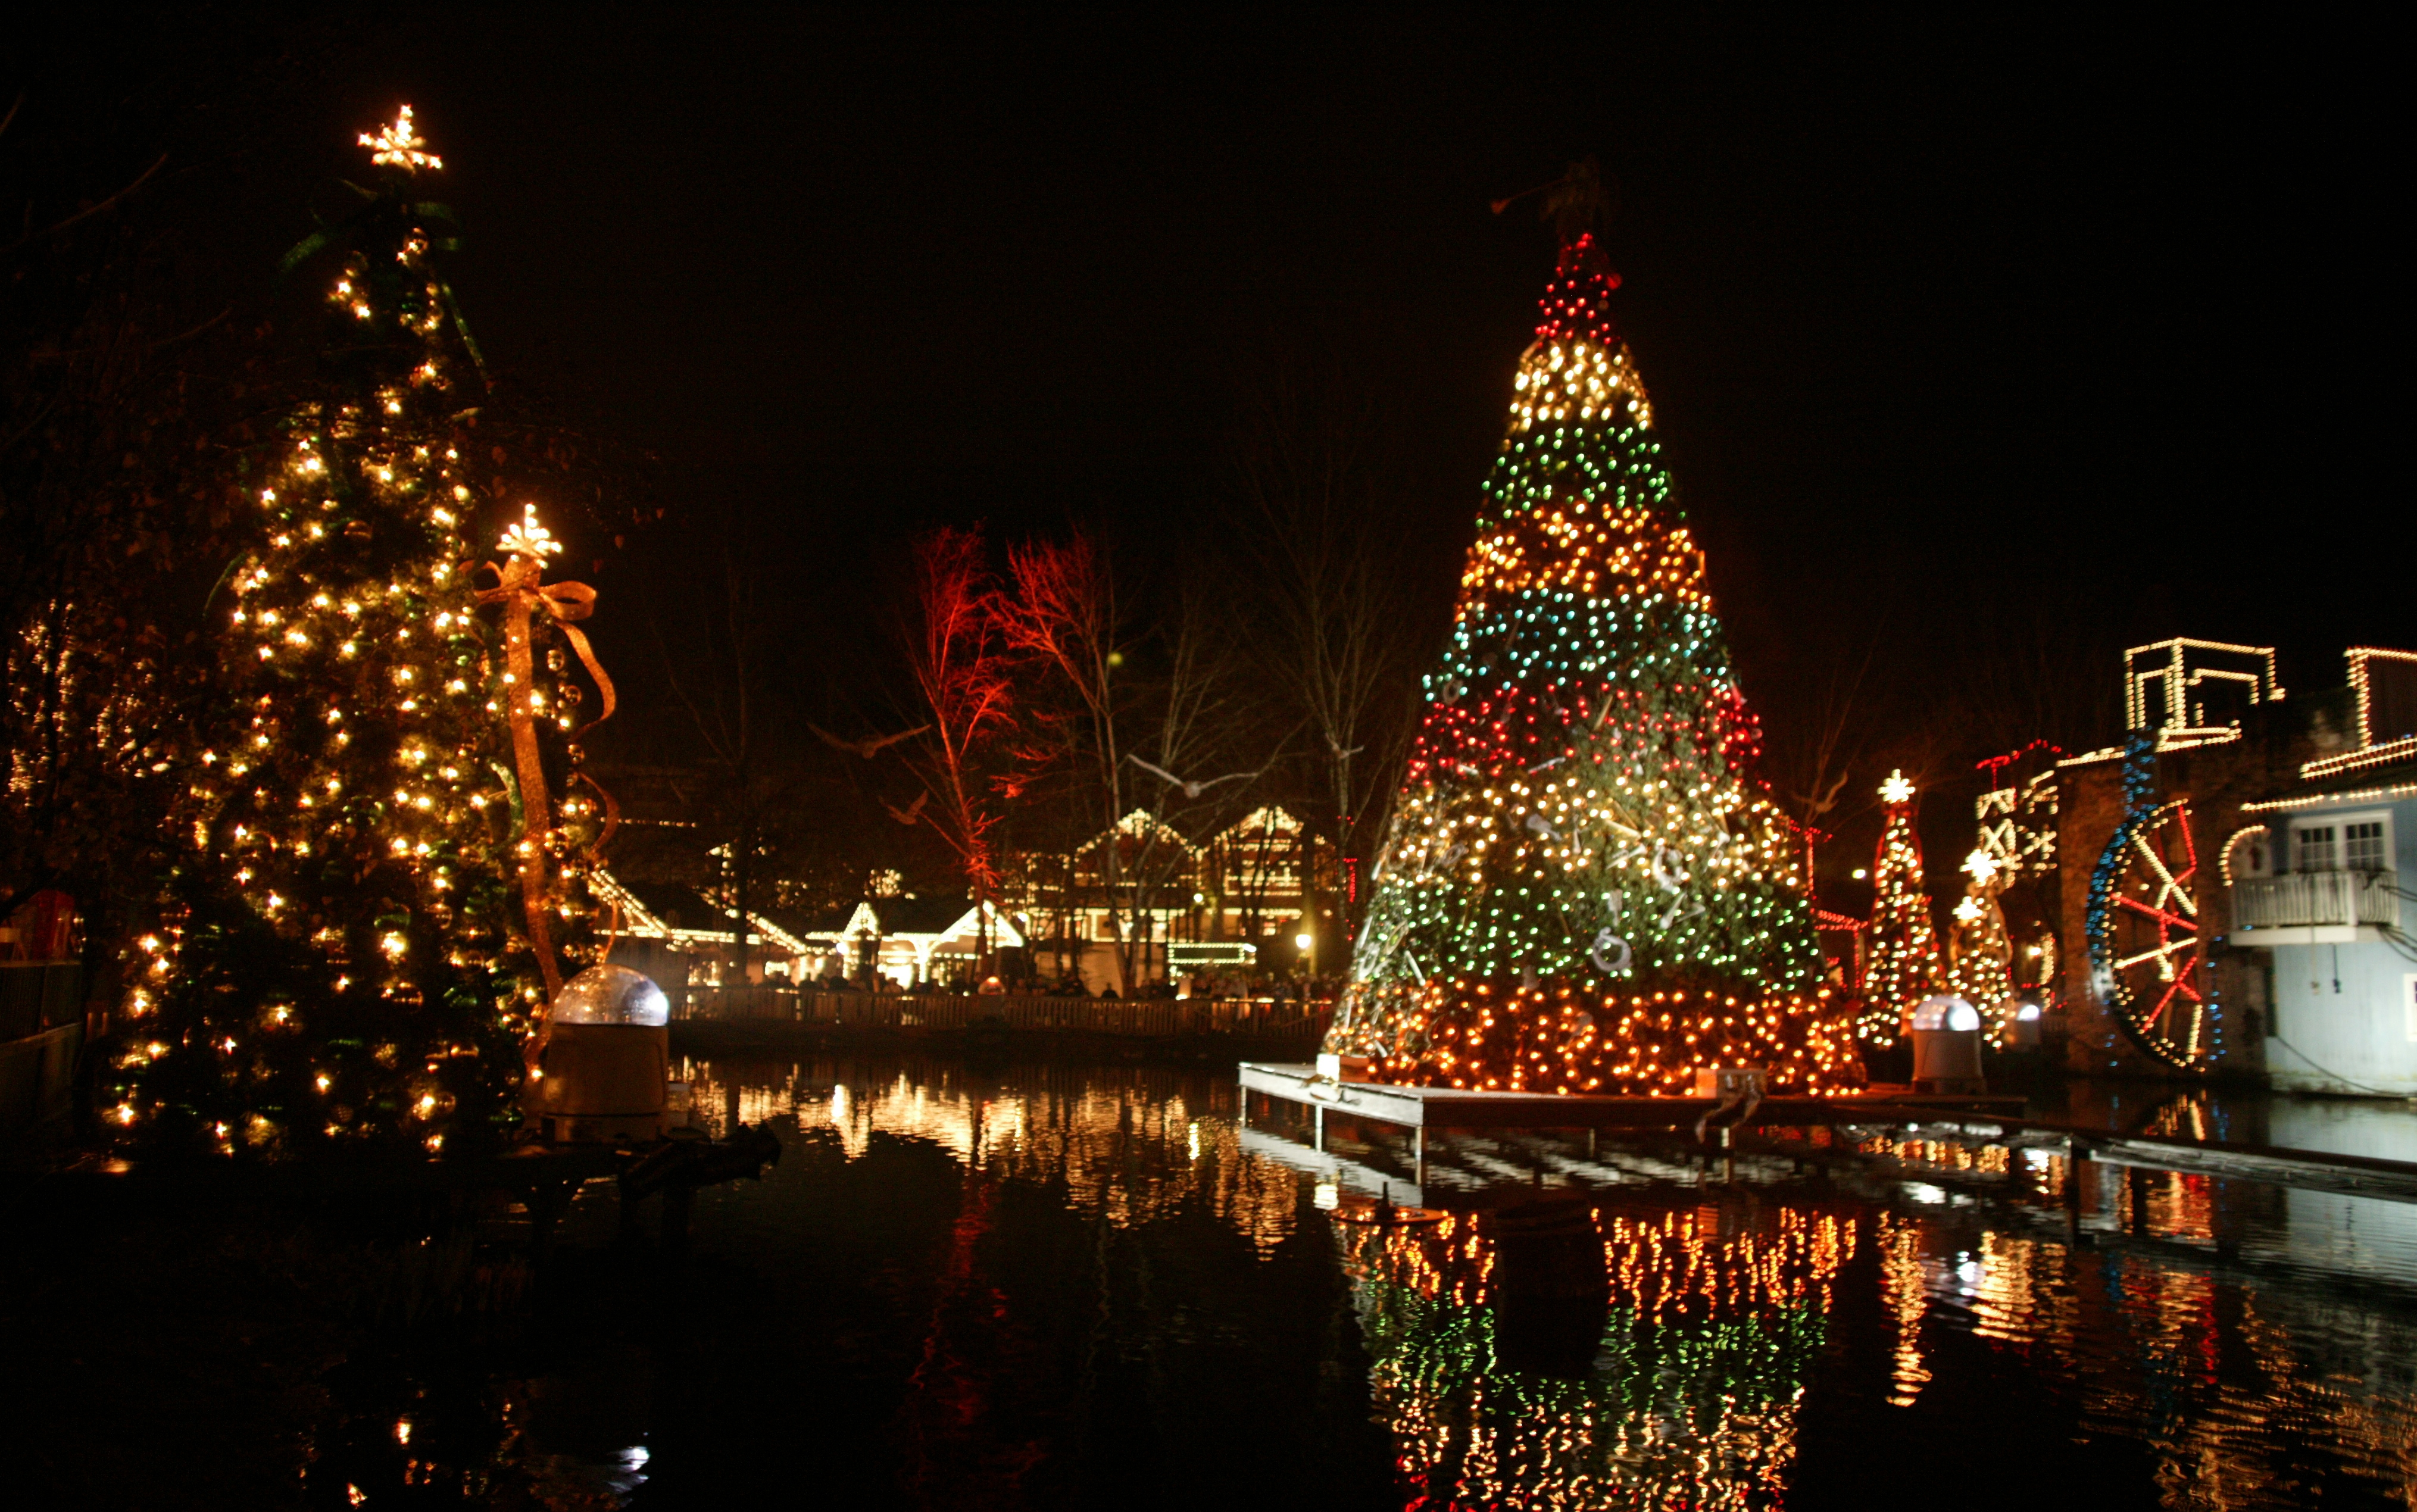 Best places in the South Christmas in Gatlinburg, Pigeon Forge